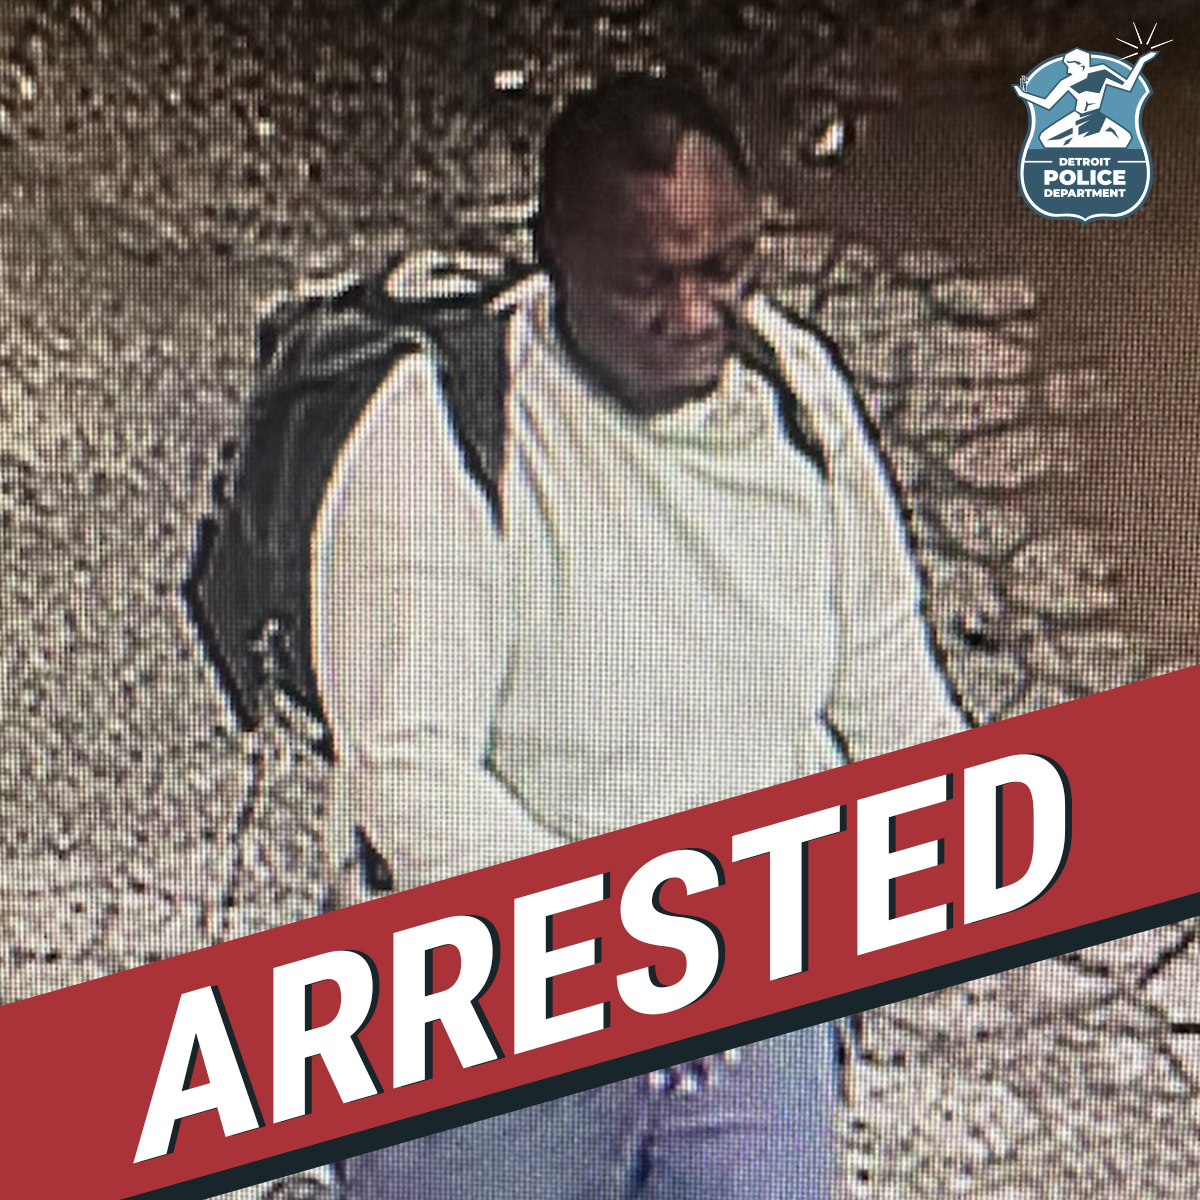 Arrested this suspect in connection to the robbery and aggravated assault of an adult male victim in the 9900 block of Gratiot that occurred on Sunday, July, 16